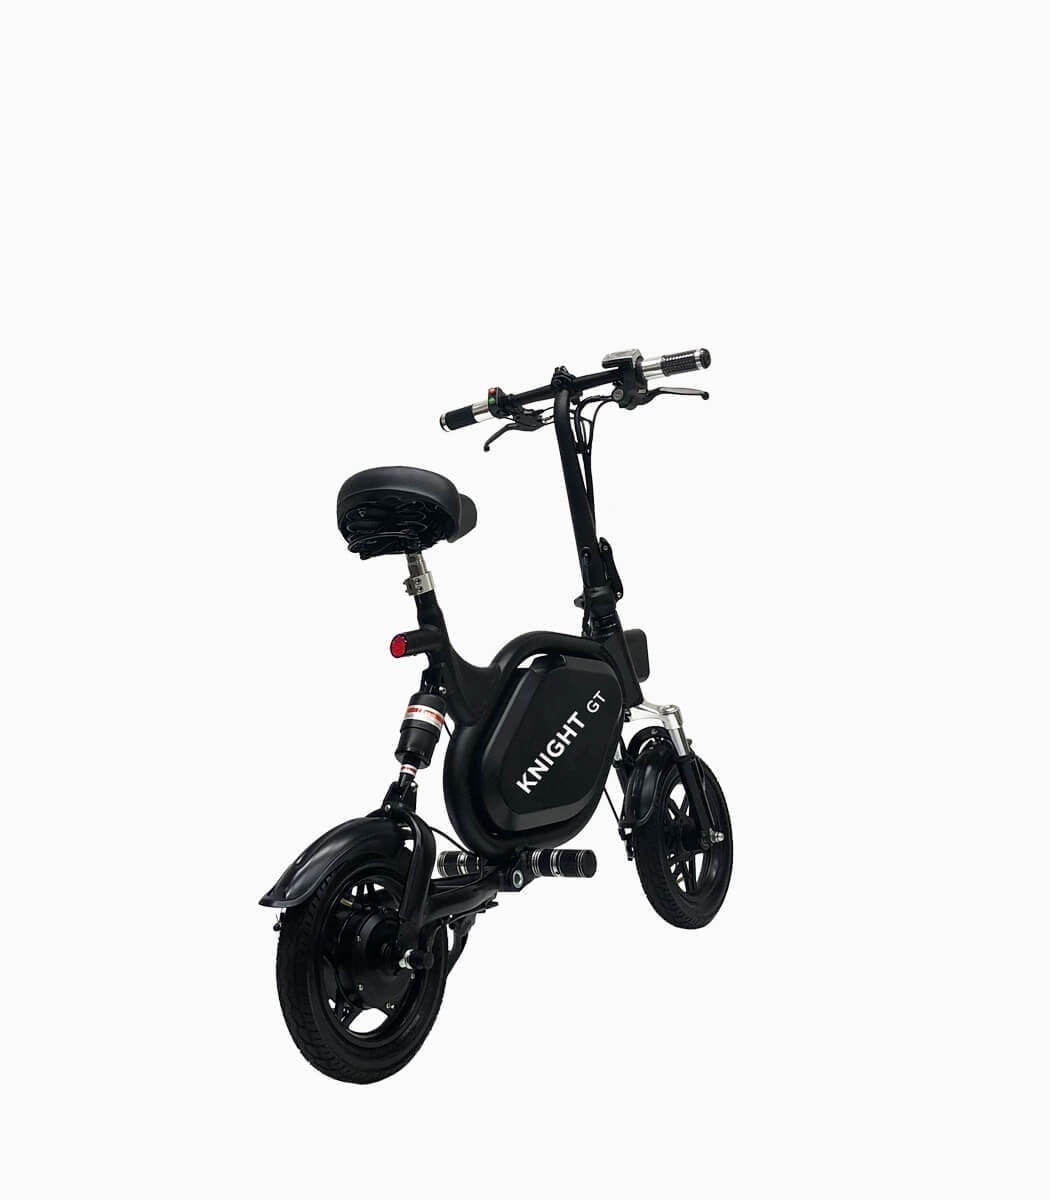 MOBOT KNIGHT GT (BLACK10AH) UL2272 certified e-scooter rear angled right